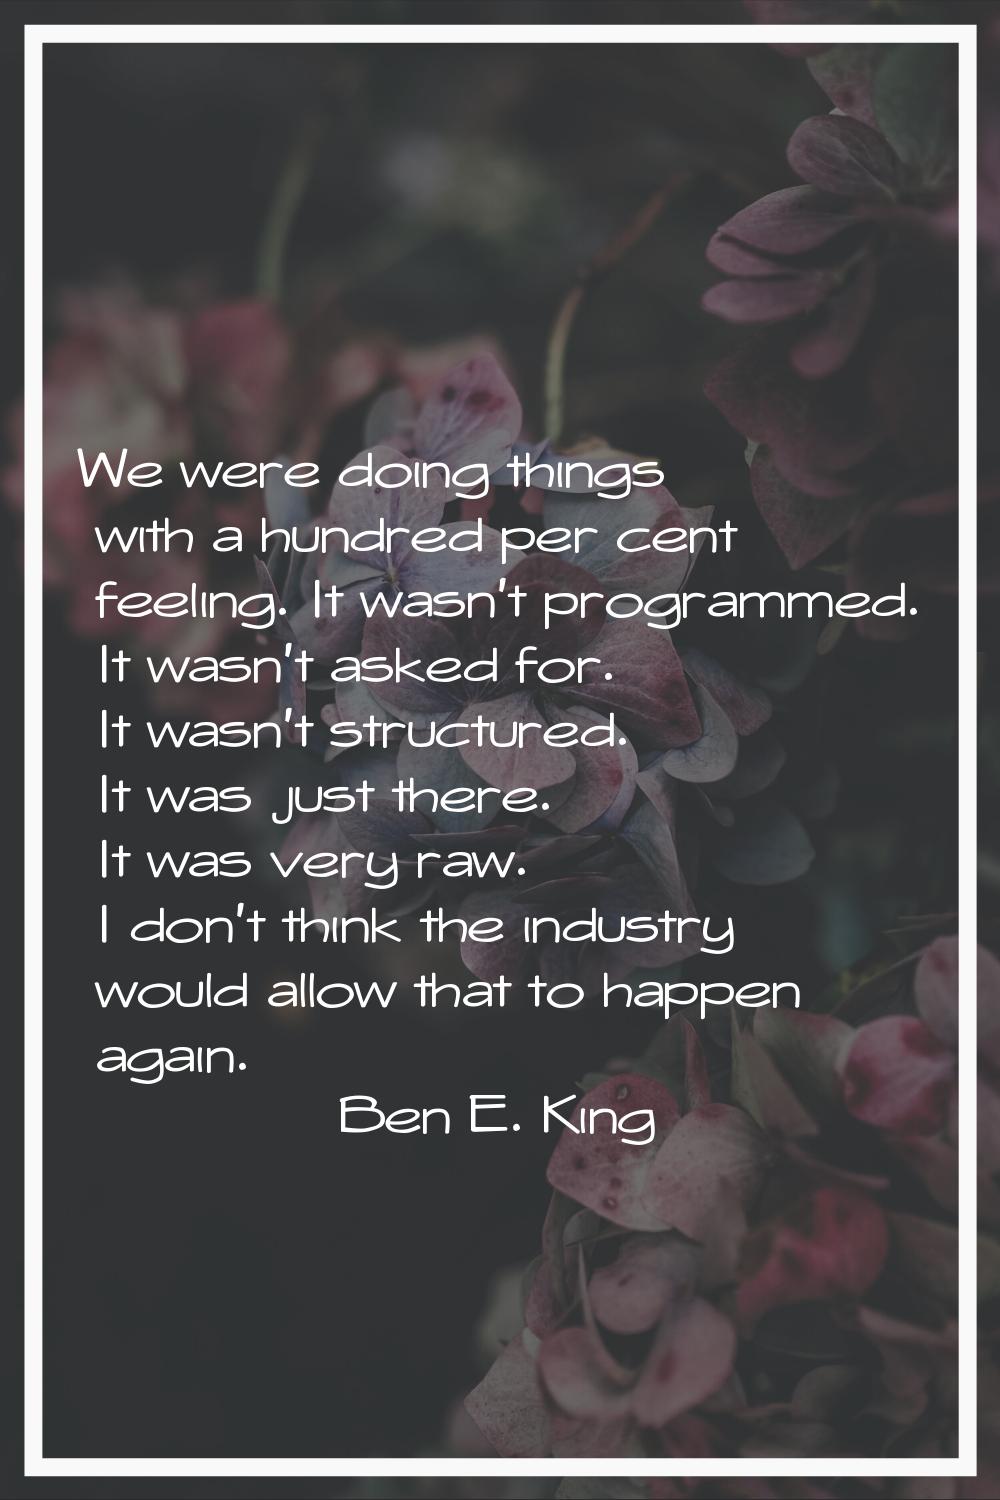 We were doing things with a hundred per cent feeling. It wasn't programmed. It wasn't asked for. It